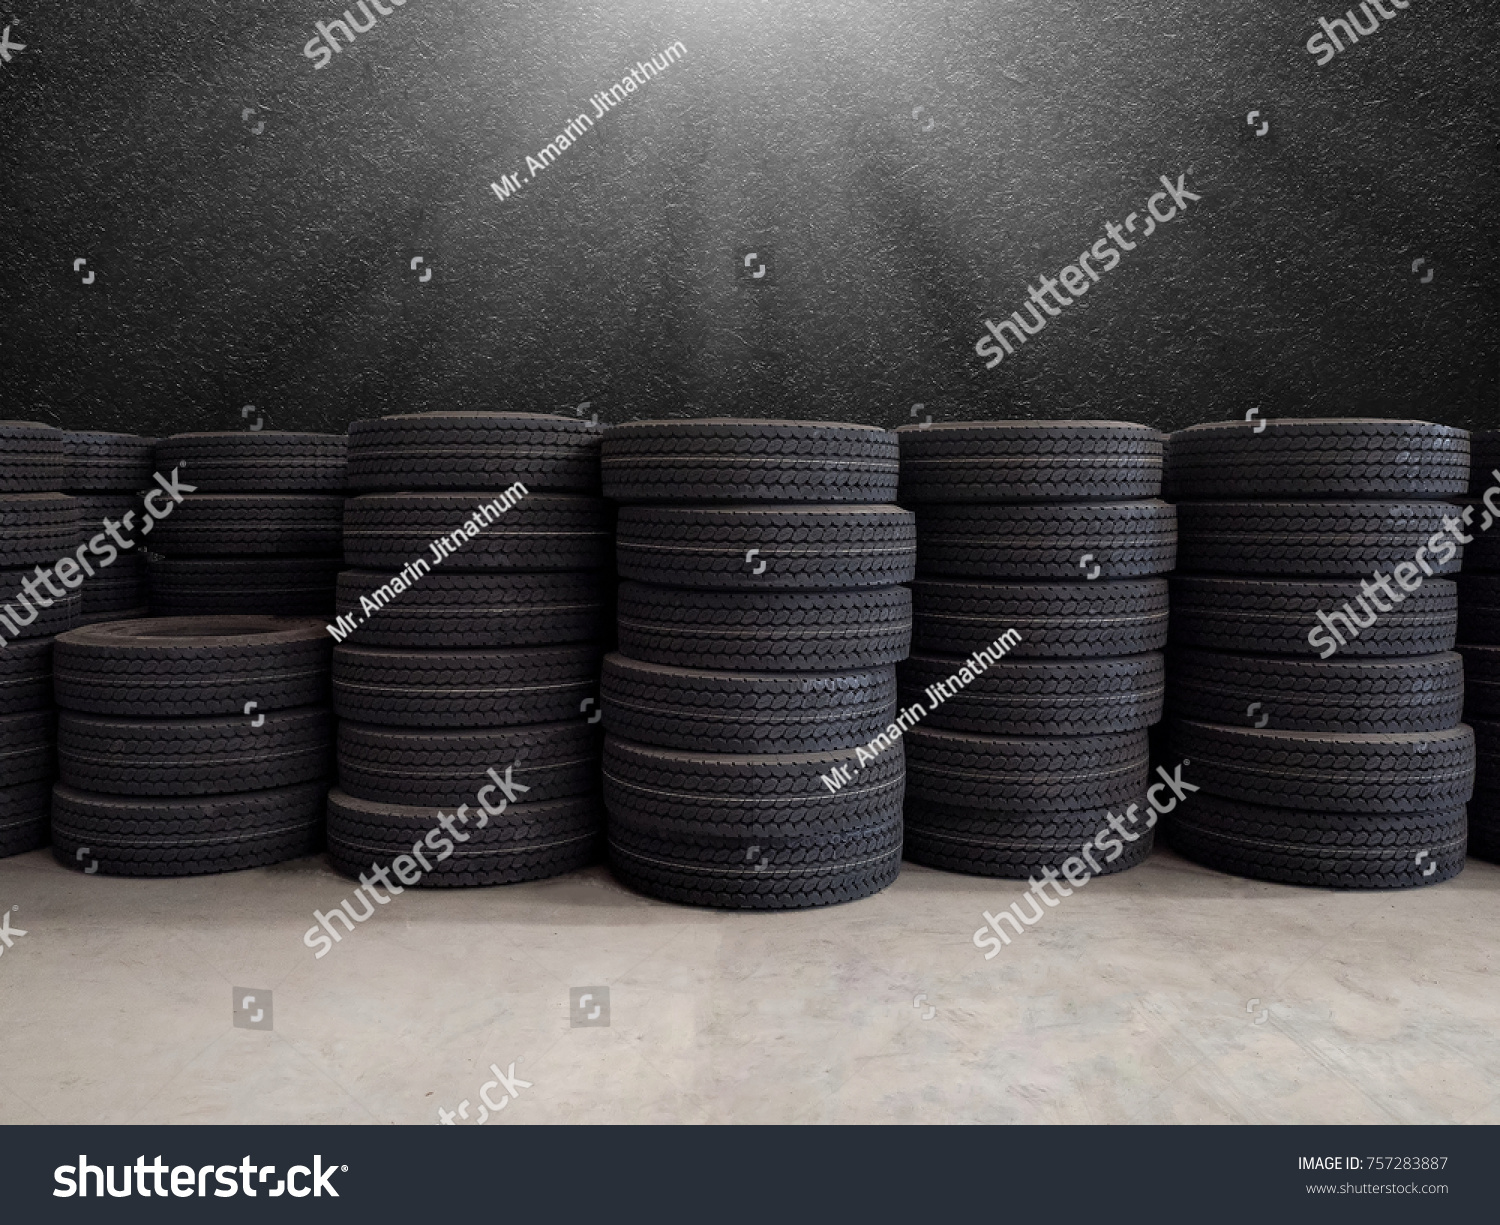 Stacks of tires in warehouse, Tires for sale at a tire store #757283887